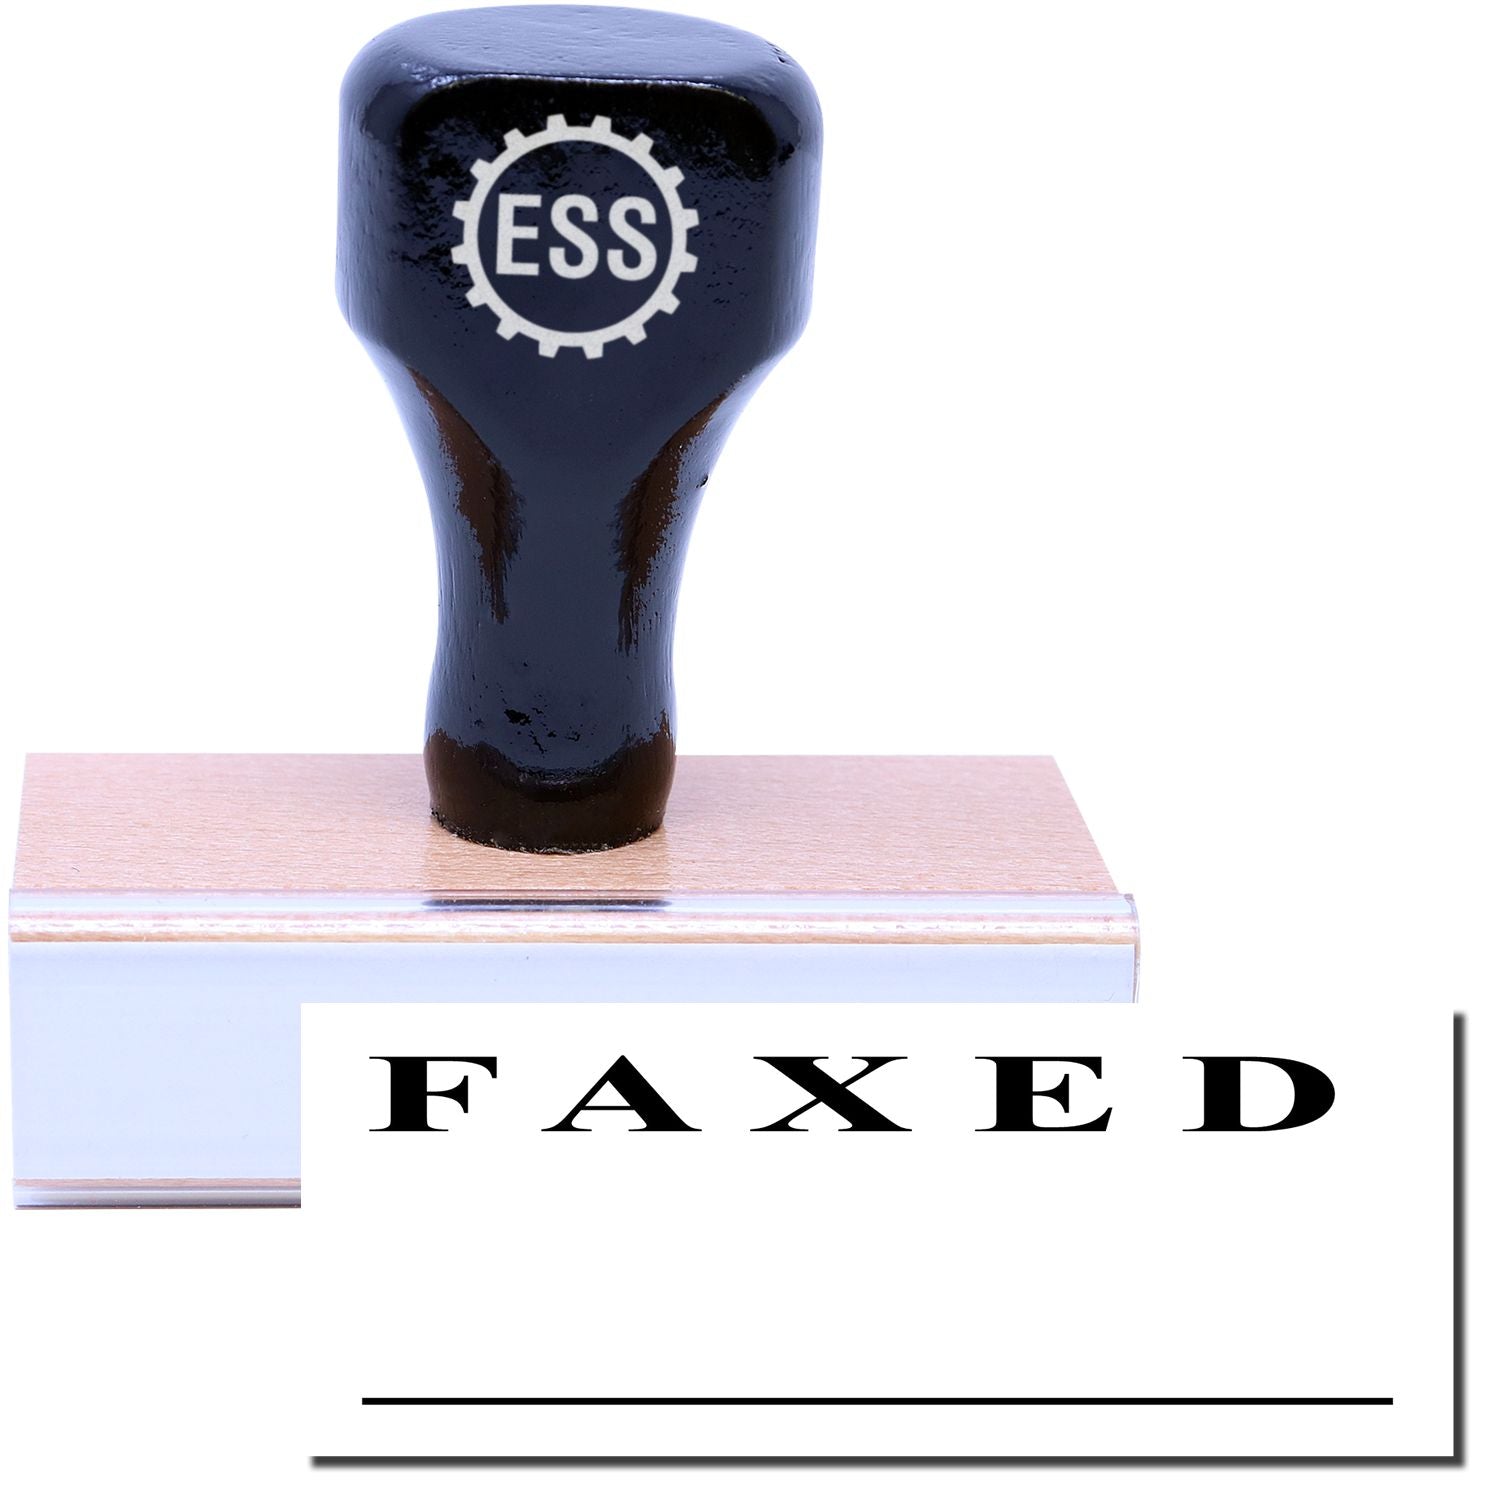 A stock office rubber stamp with a stamped image showing how the text "FAXED" with a line below the text is displayed after stamping.